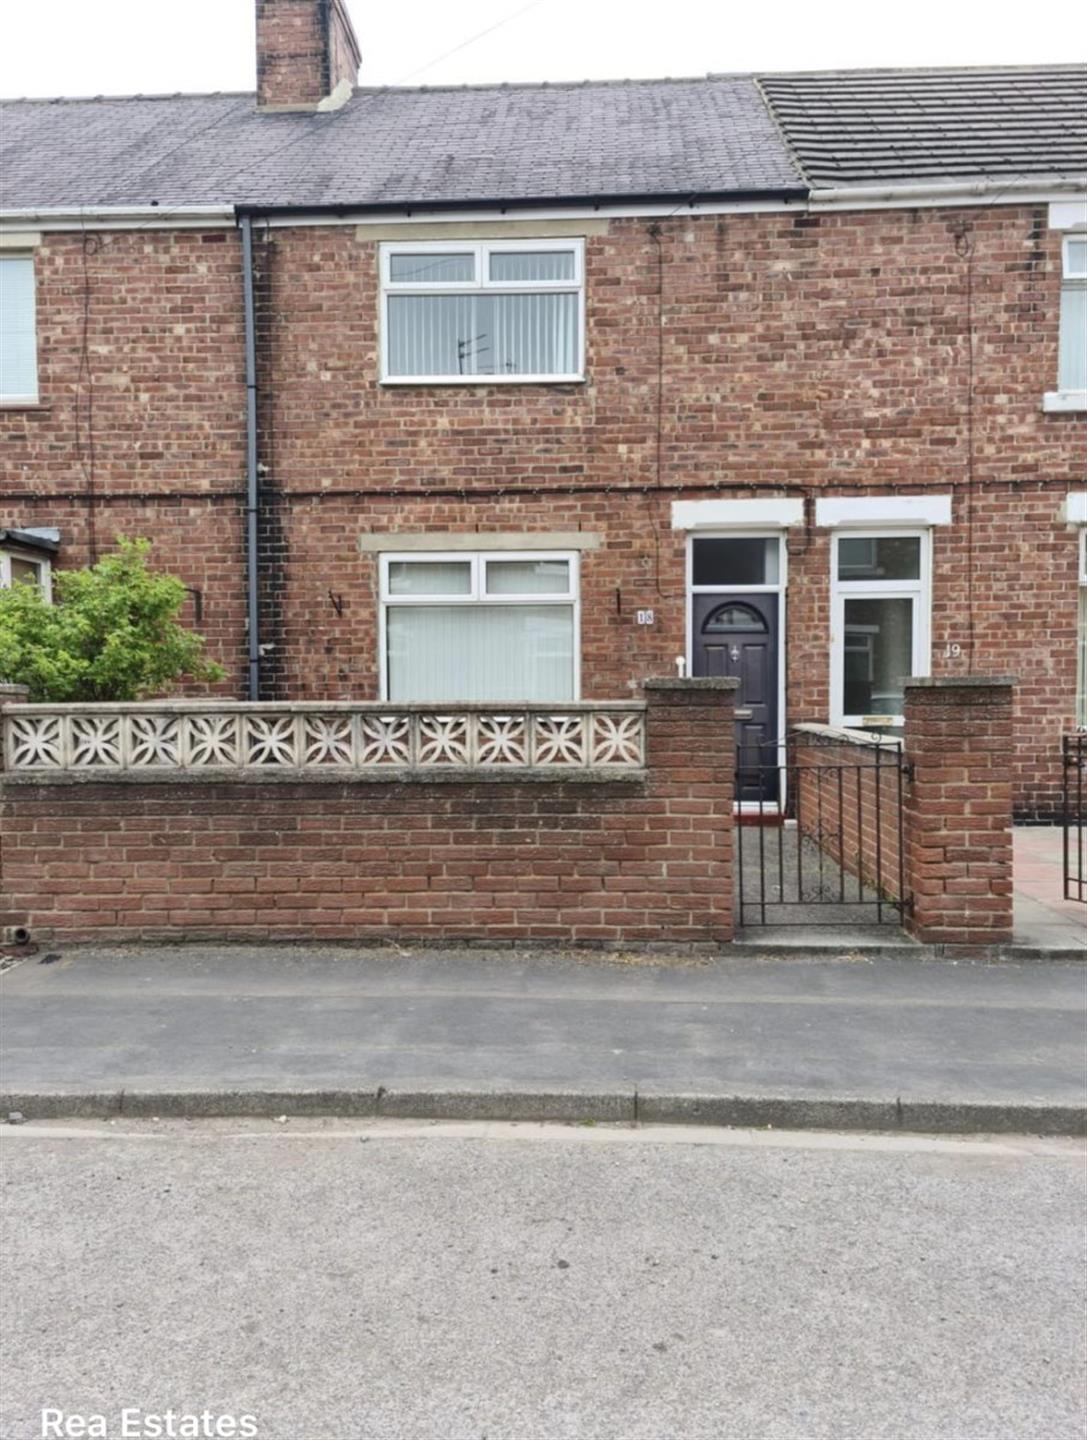 2 bedroom terraced house To Let in Saint Helens - Main Image.